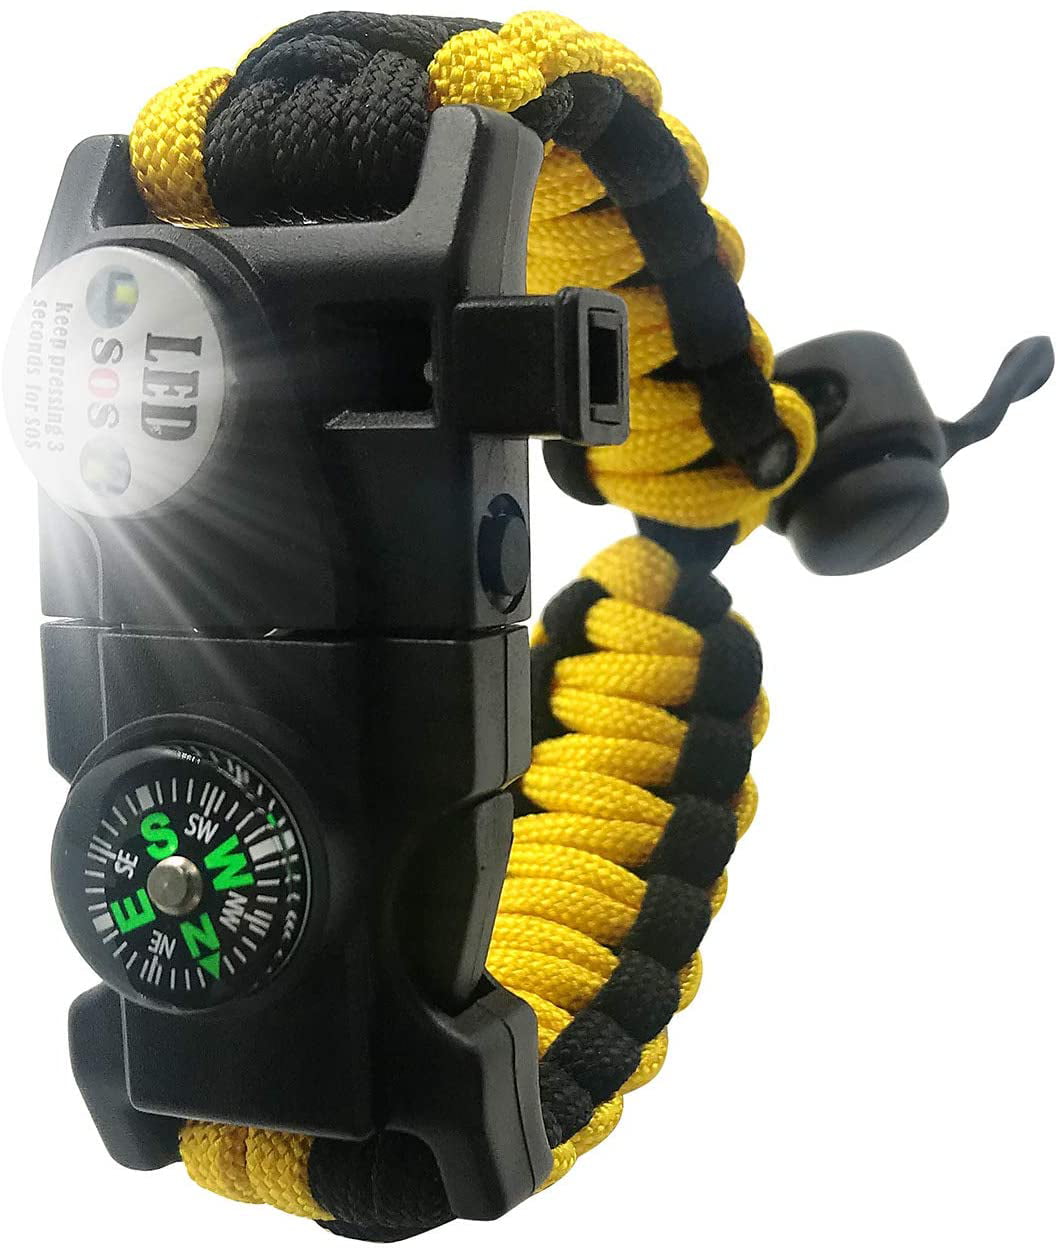 20 in 1 Emergency Survival Paracord Bracelet SOS LED Compass Outdoor 1PC 